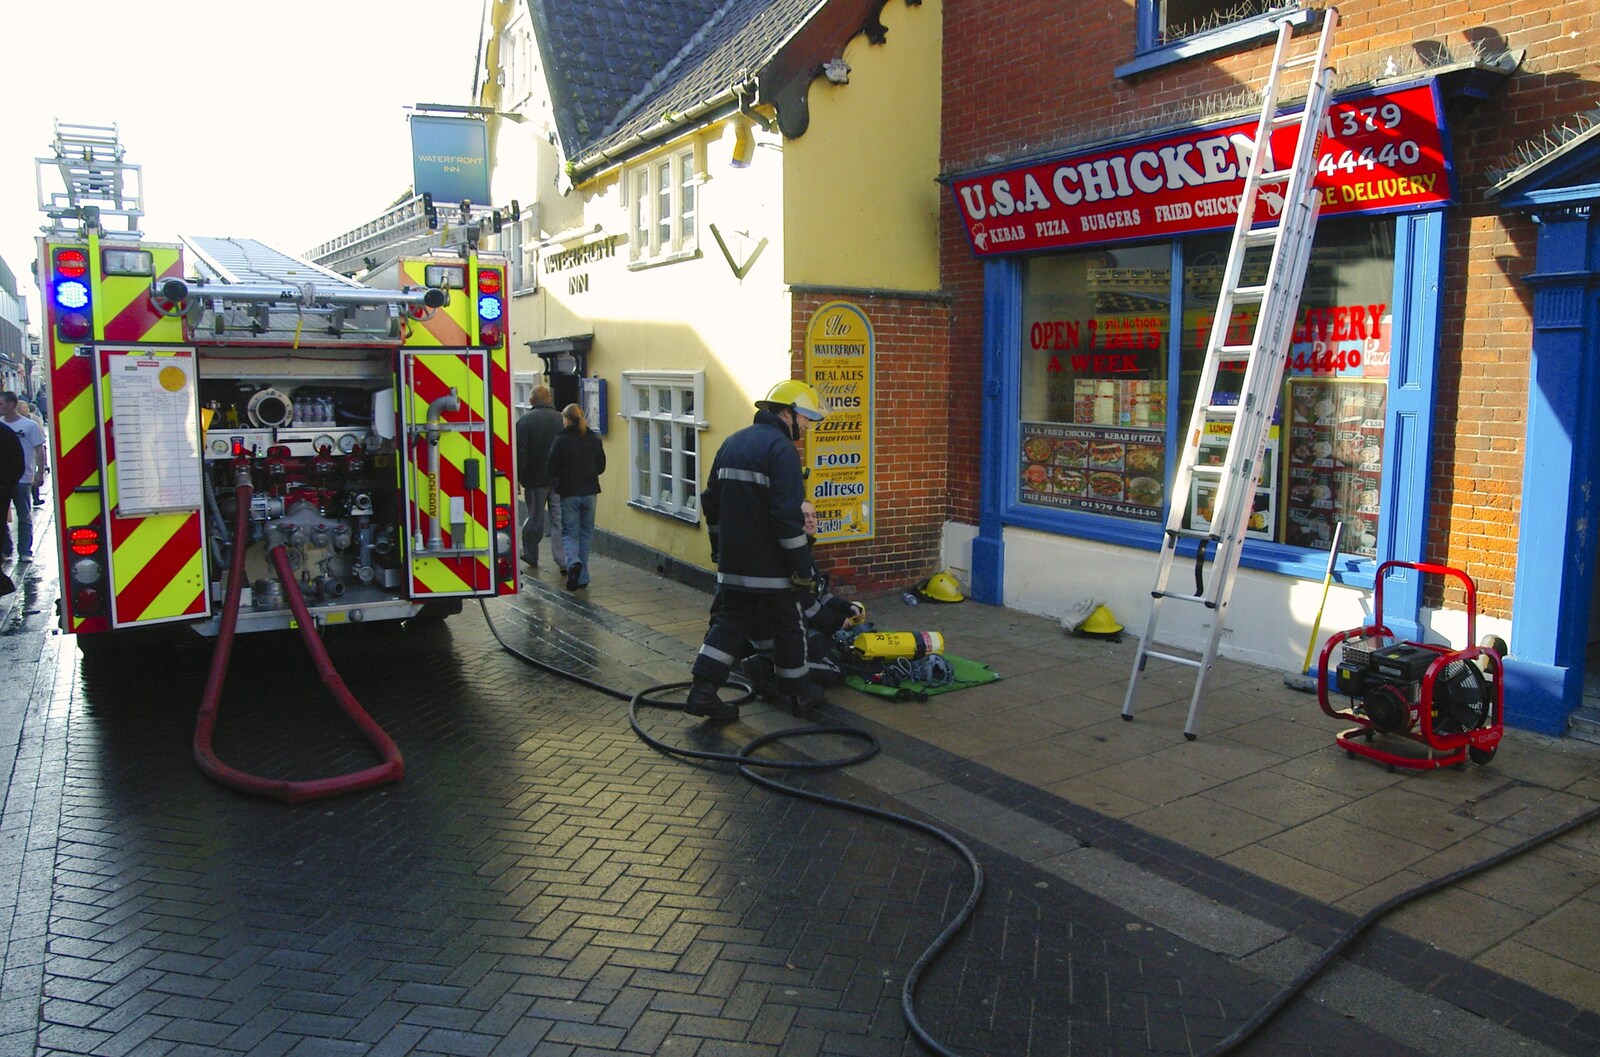 The scene outside USA Chicken from USA Chicken Catches Fire: Gov and the Ambulance, Diss, Norfolk - 19th November 2005